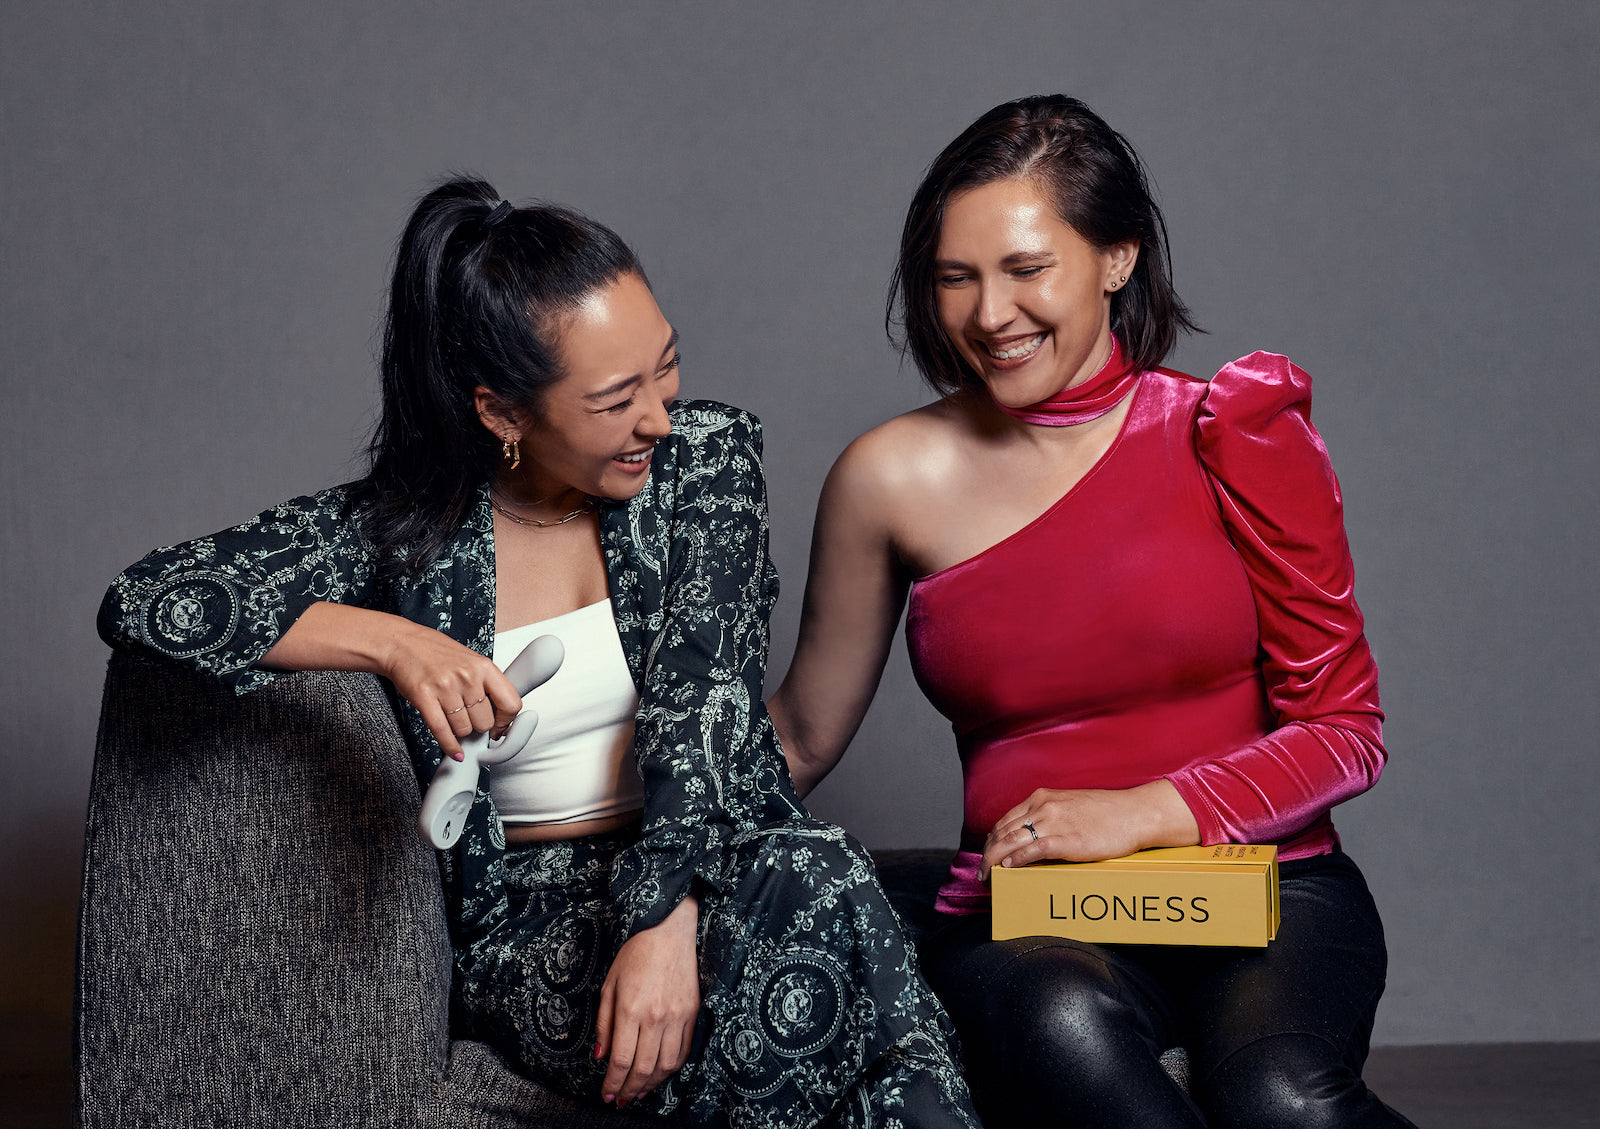 Lioness Co-founders Anna and Liz holding Lioness and box while sitting on couch